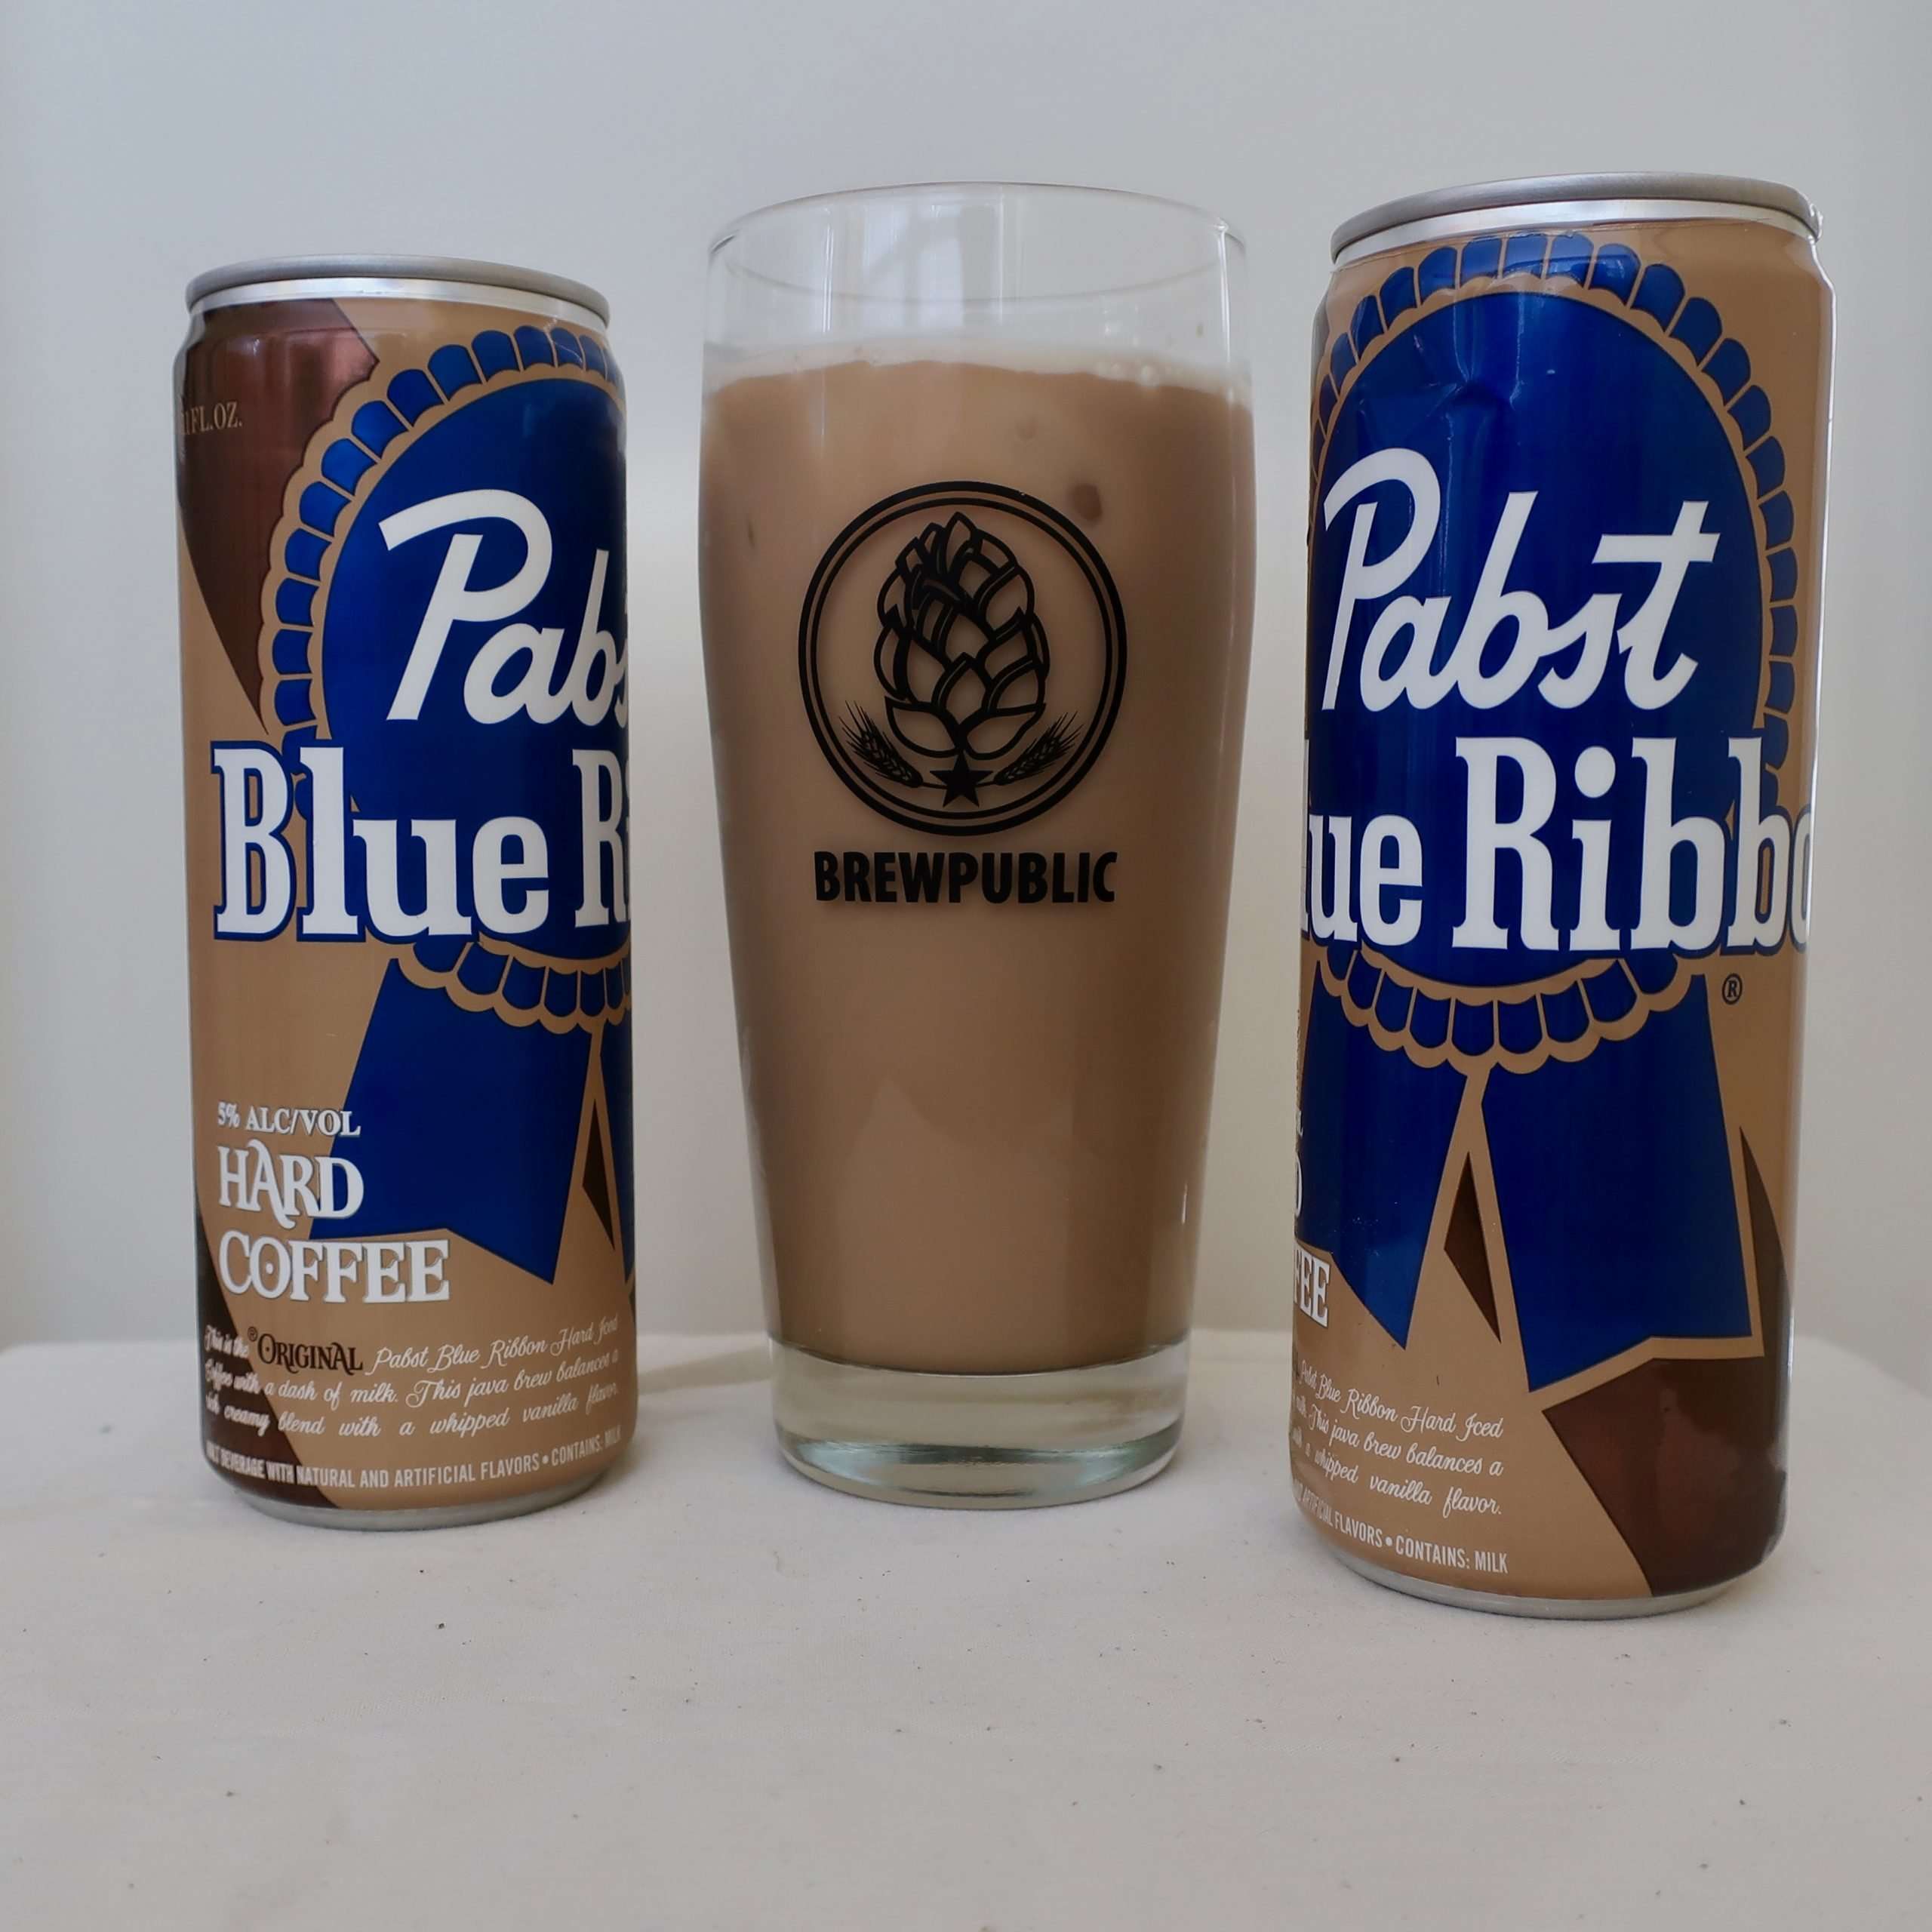 Beer Review  Pabst Blue Ribbon Hard Coffee  BREWPUBLIC.com